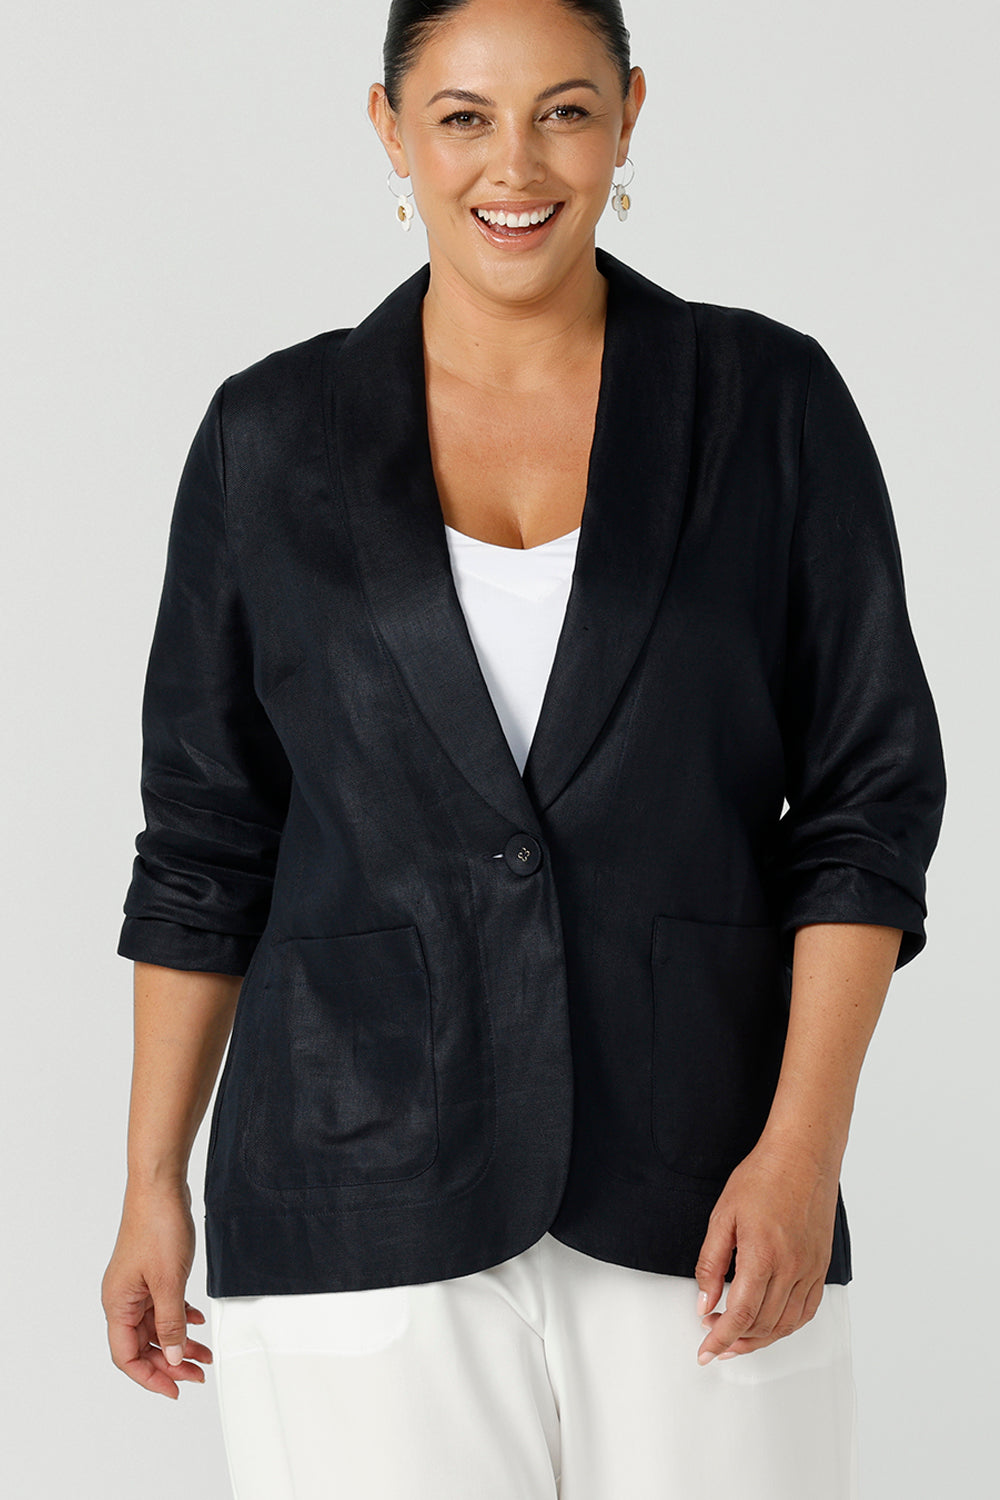 Close up of a size 12 woman wearing a soft linen blazer jacket with a tailored design. A transeasonal linen work jacket, in a beautiful midnight navy colour. Australian-made using sustainable 100% linen fabric. Size-inclusive fashion 8-24 for corporate casual workwear.